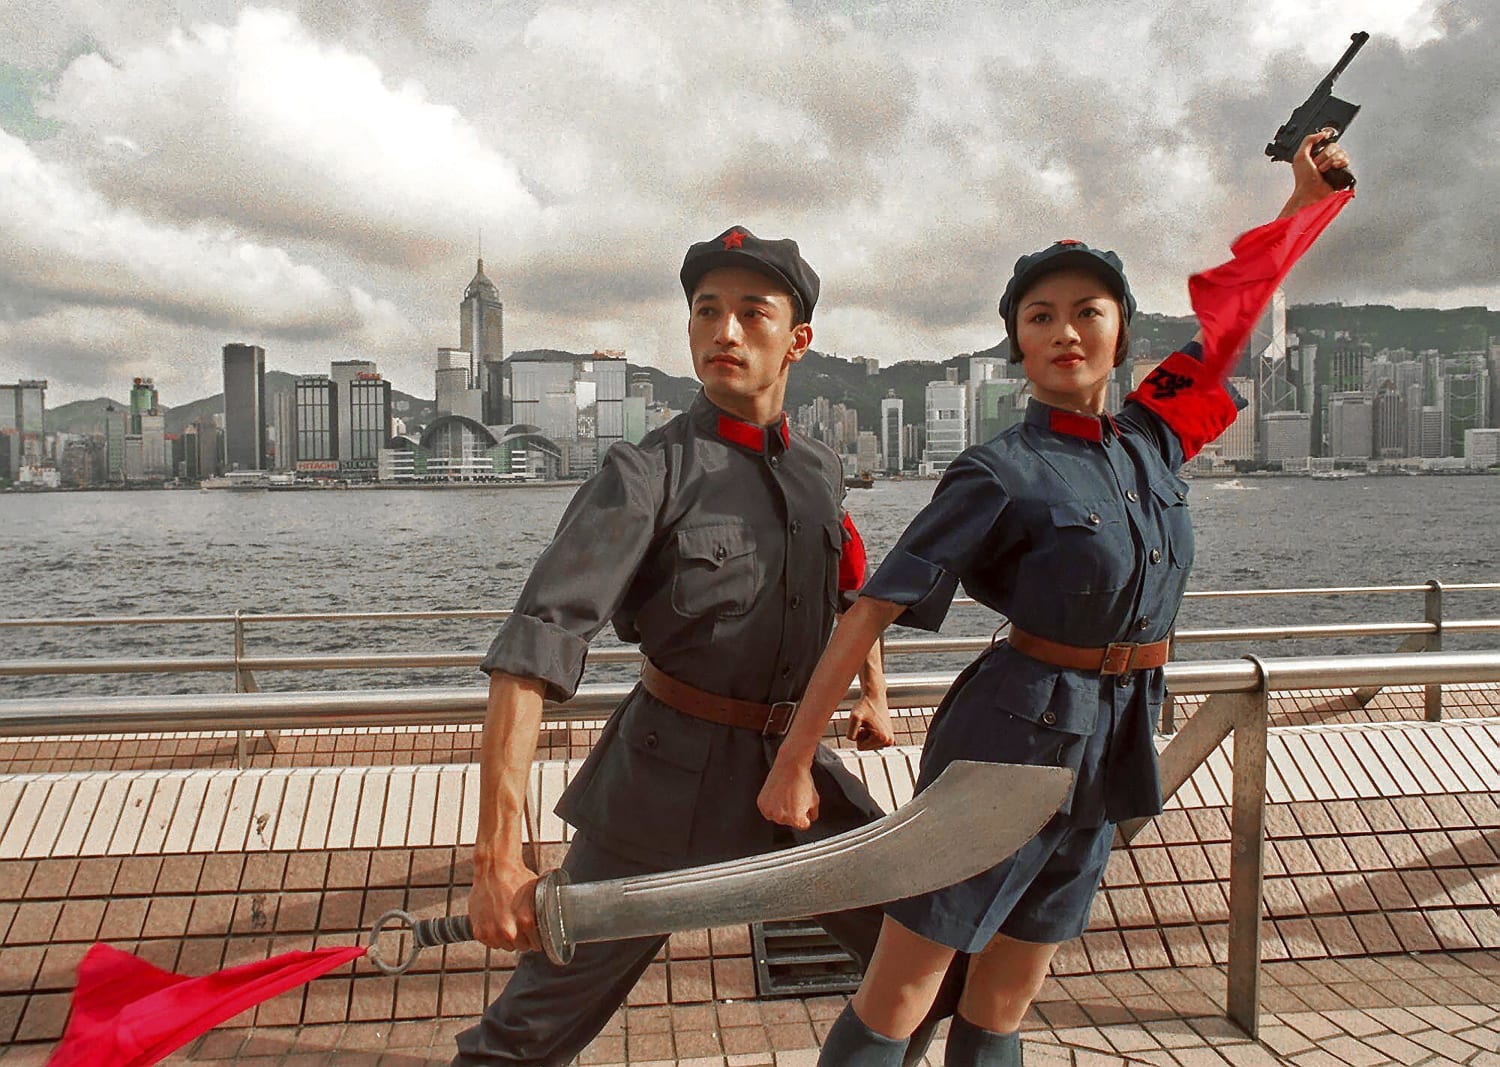 July 21, 1998, file photo, dancers of China's National Ballet, Sun Jie, left, and Zou Zhi Rui, dressed in military uniforms pose for photographers at Hong Kong's waterfront. A year after Beijing imposed a harsh national security law on Hong Kong, ... (More, below)